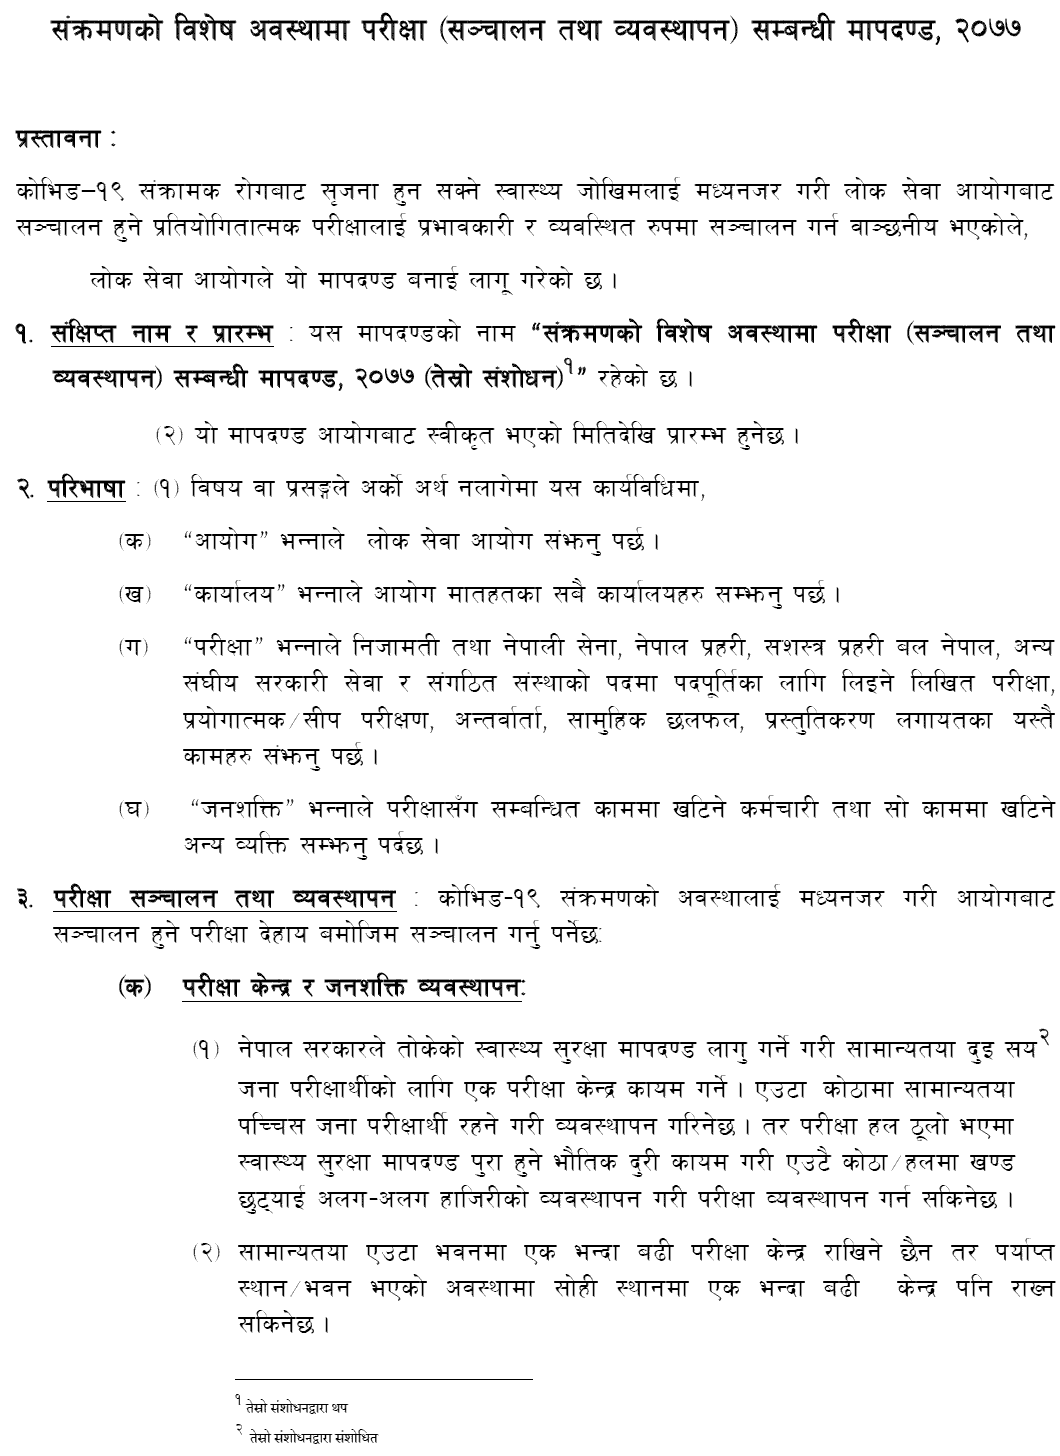 Lok Sewa Aayog Published Criteria for examination (Operation and Management) in special Cases of Transition